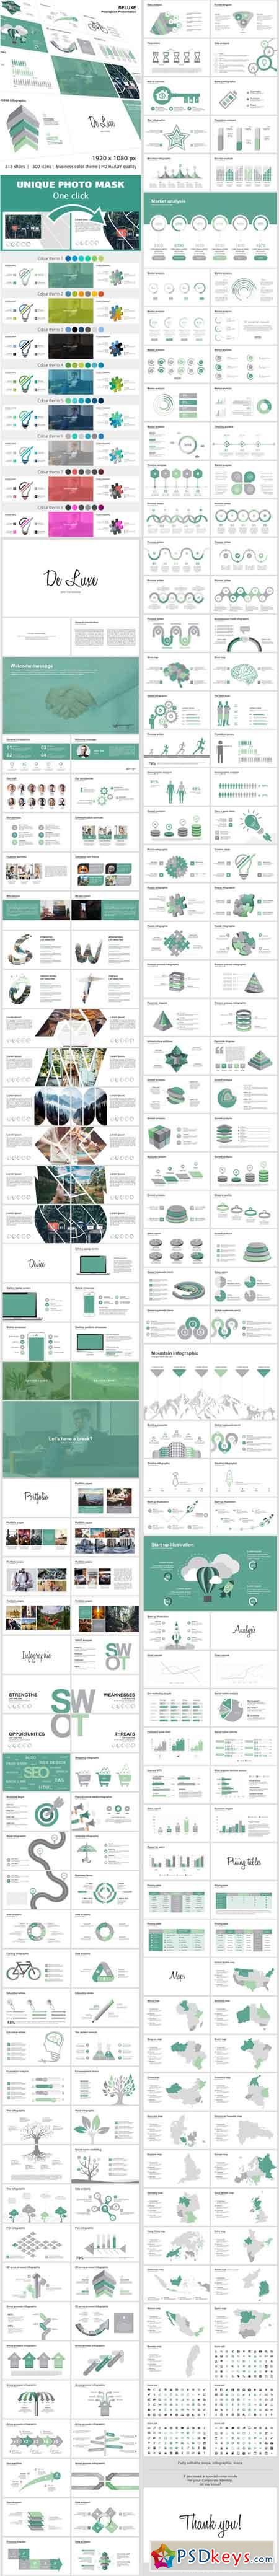 Deluxe Start Up Business Powerpoint Template 17214621